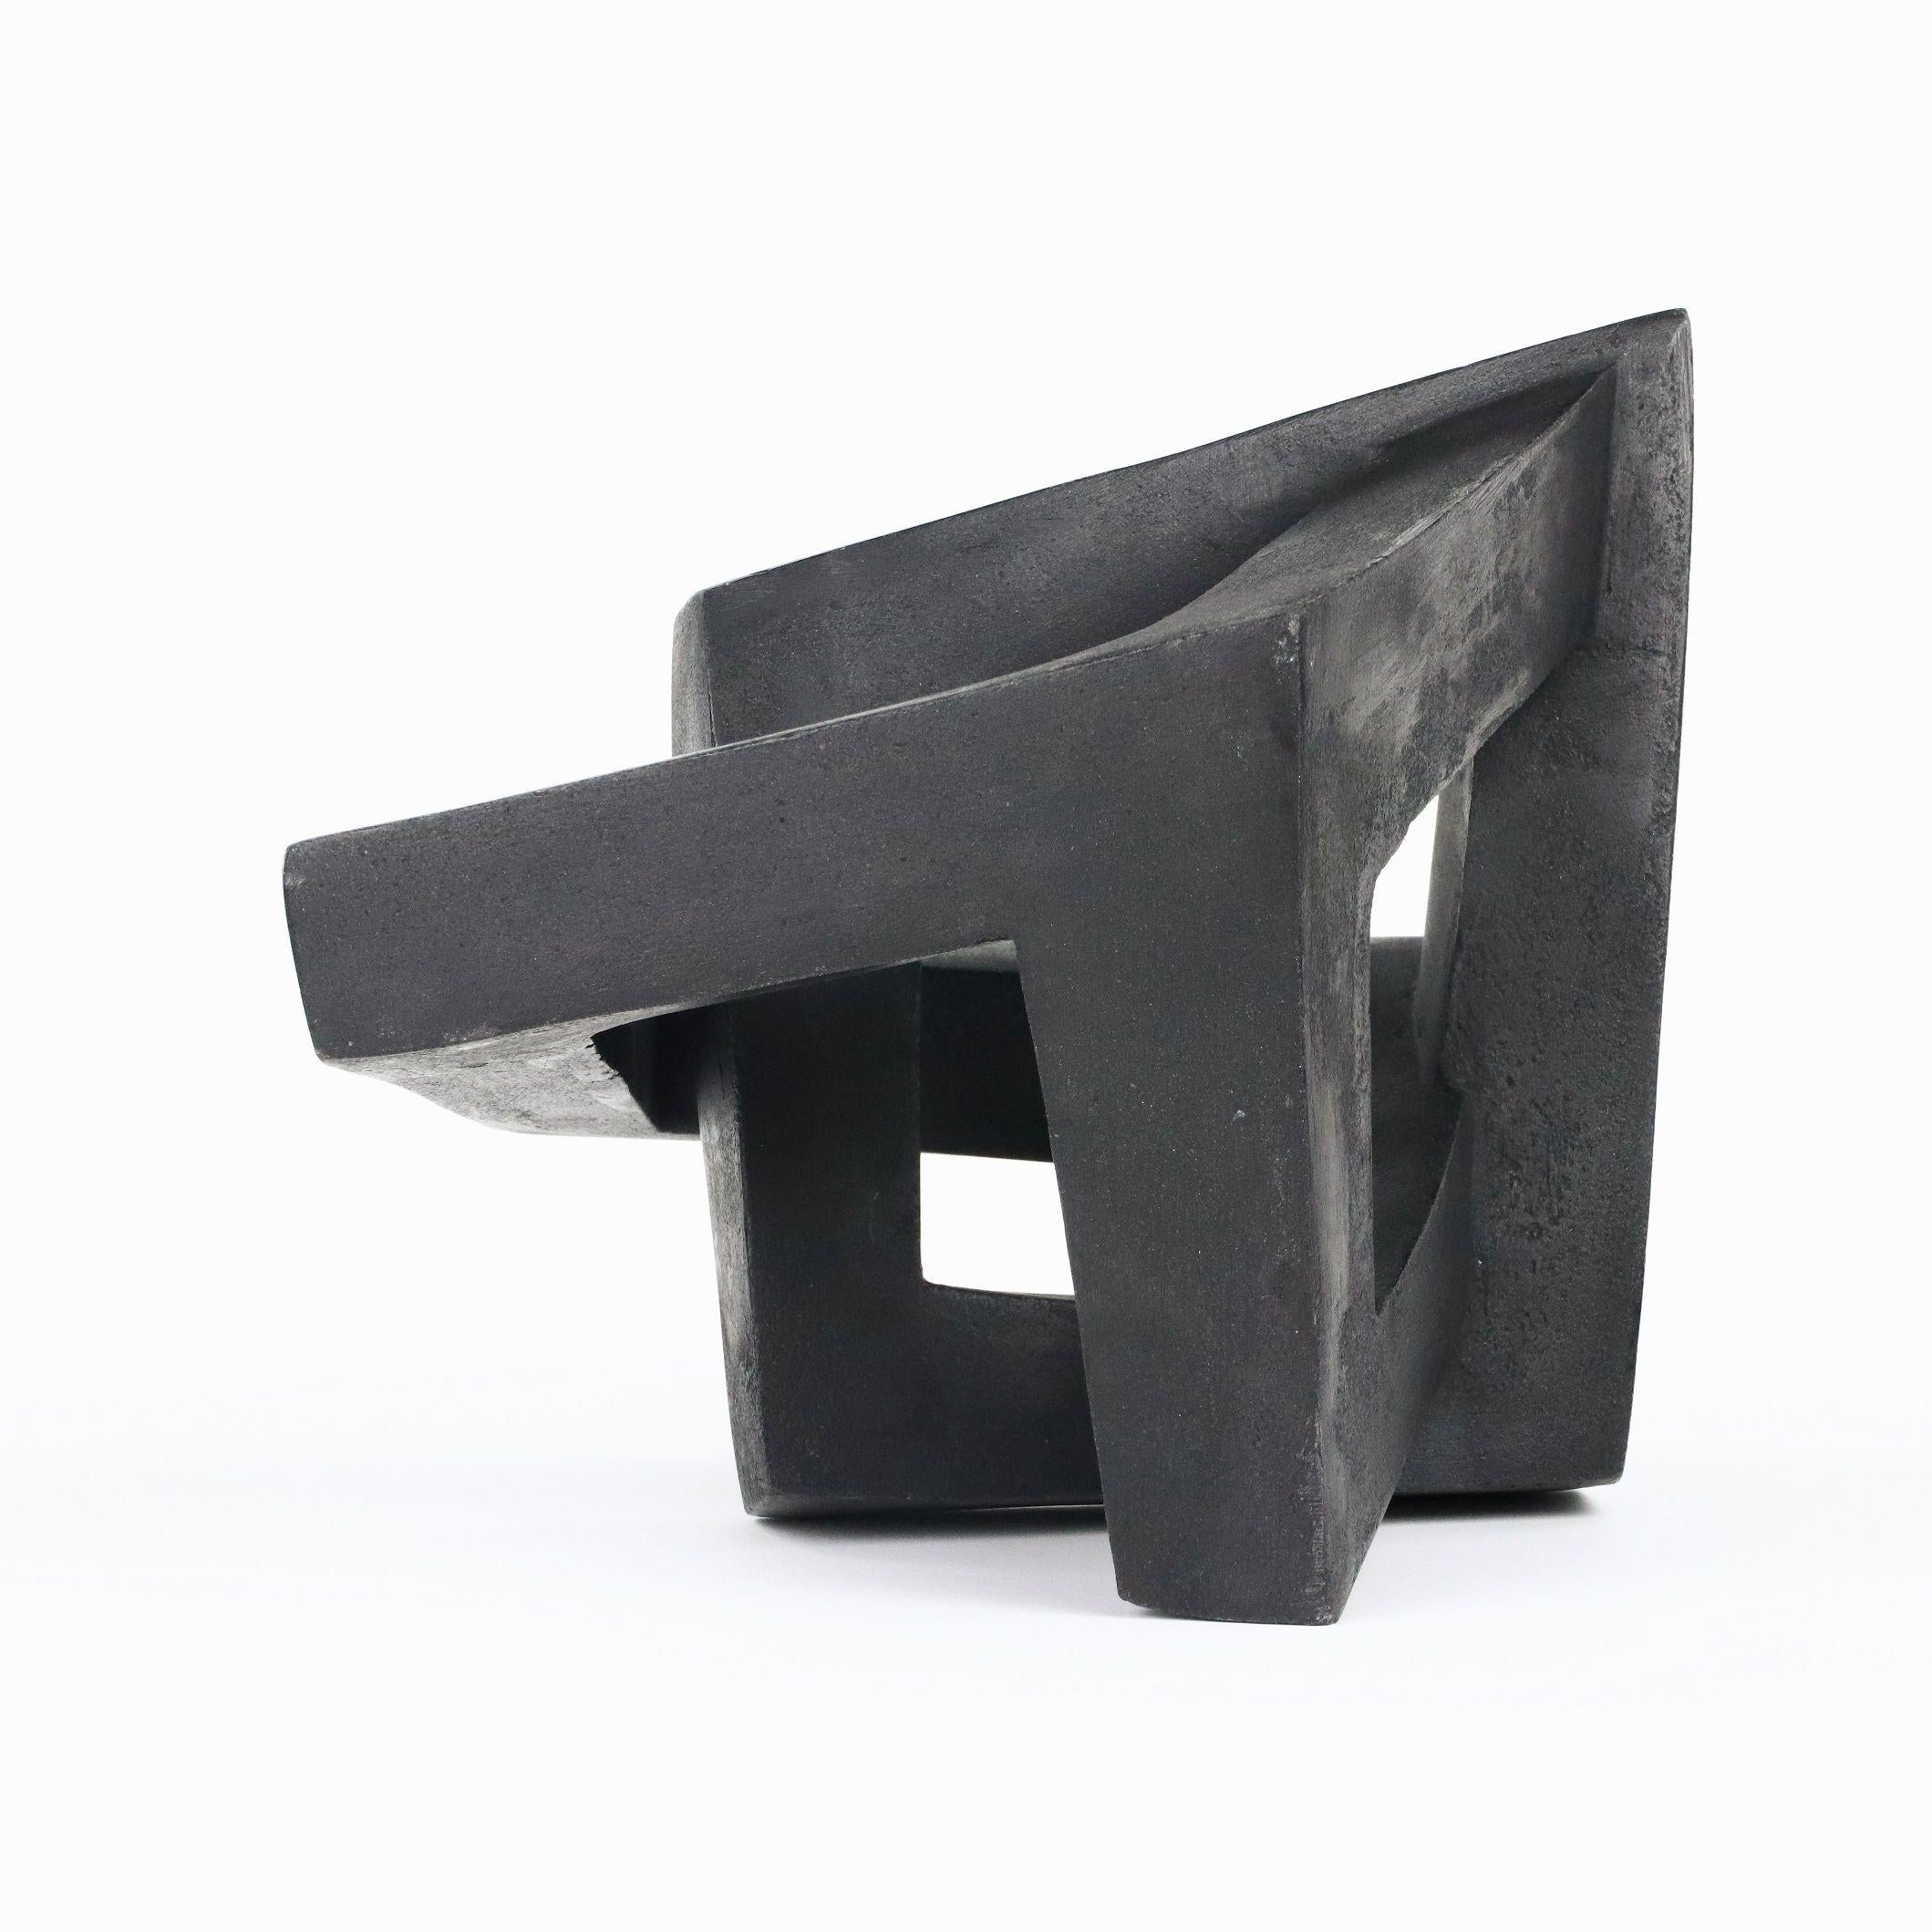 Variation III by Delphine Brabant - Abstract geometric resin sculpture For Sale 2